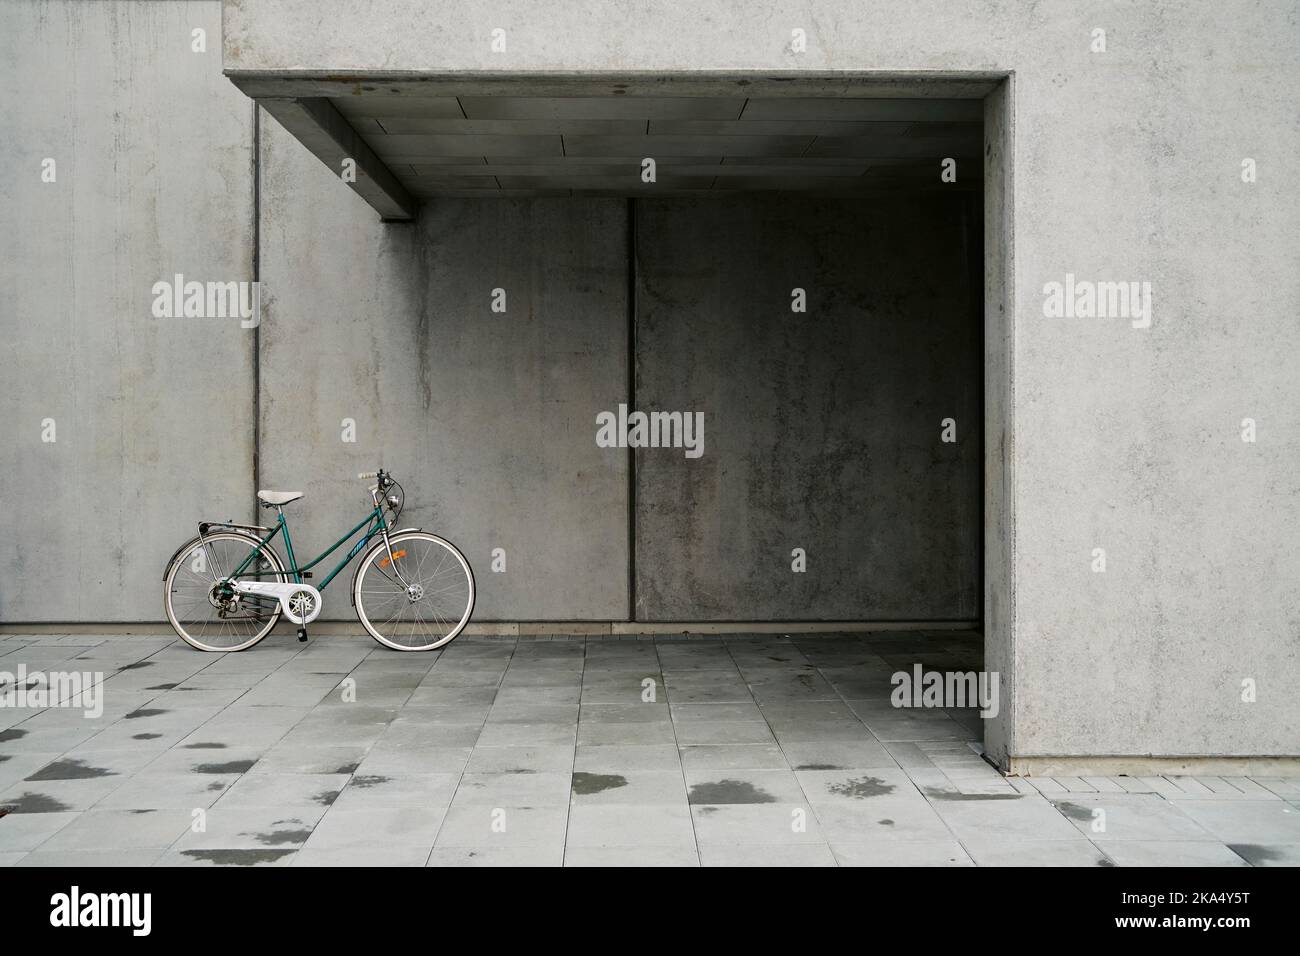 Bicycle parked near entrance of modern building Stock Photo